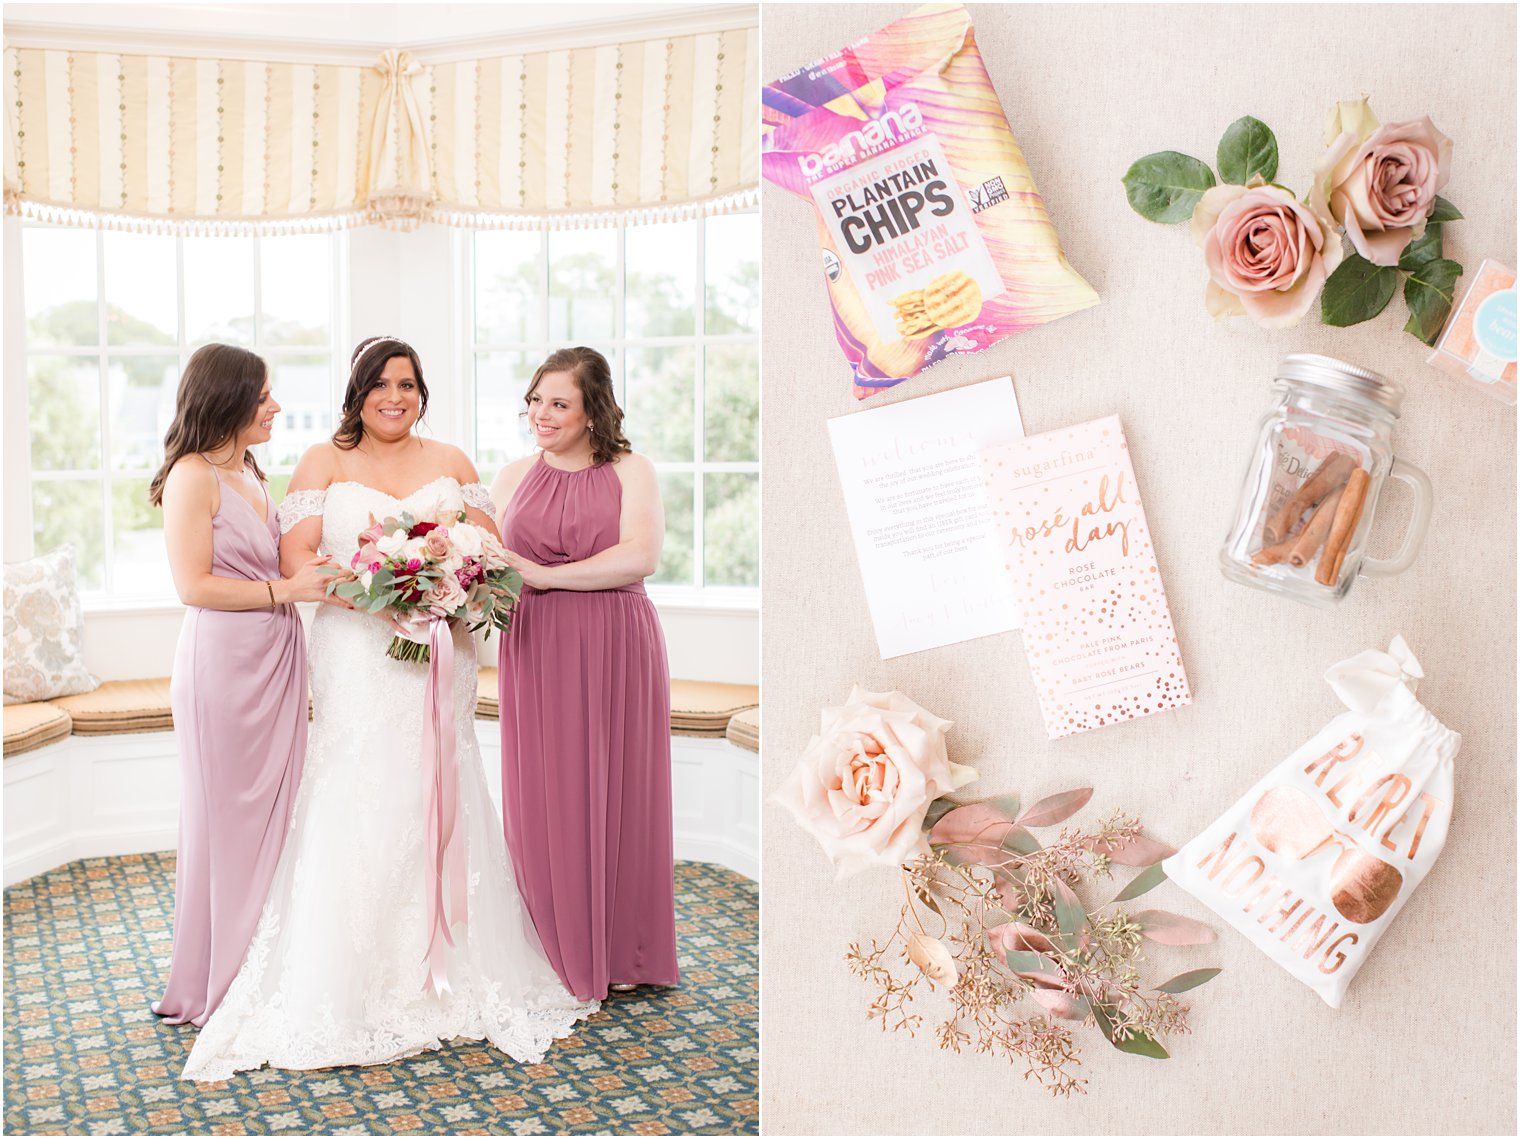 bridesmaids and their gifts for Clarks Landing Yacht Club wedding day by Idalia Photography